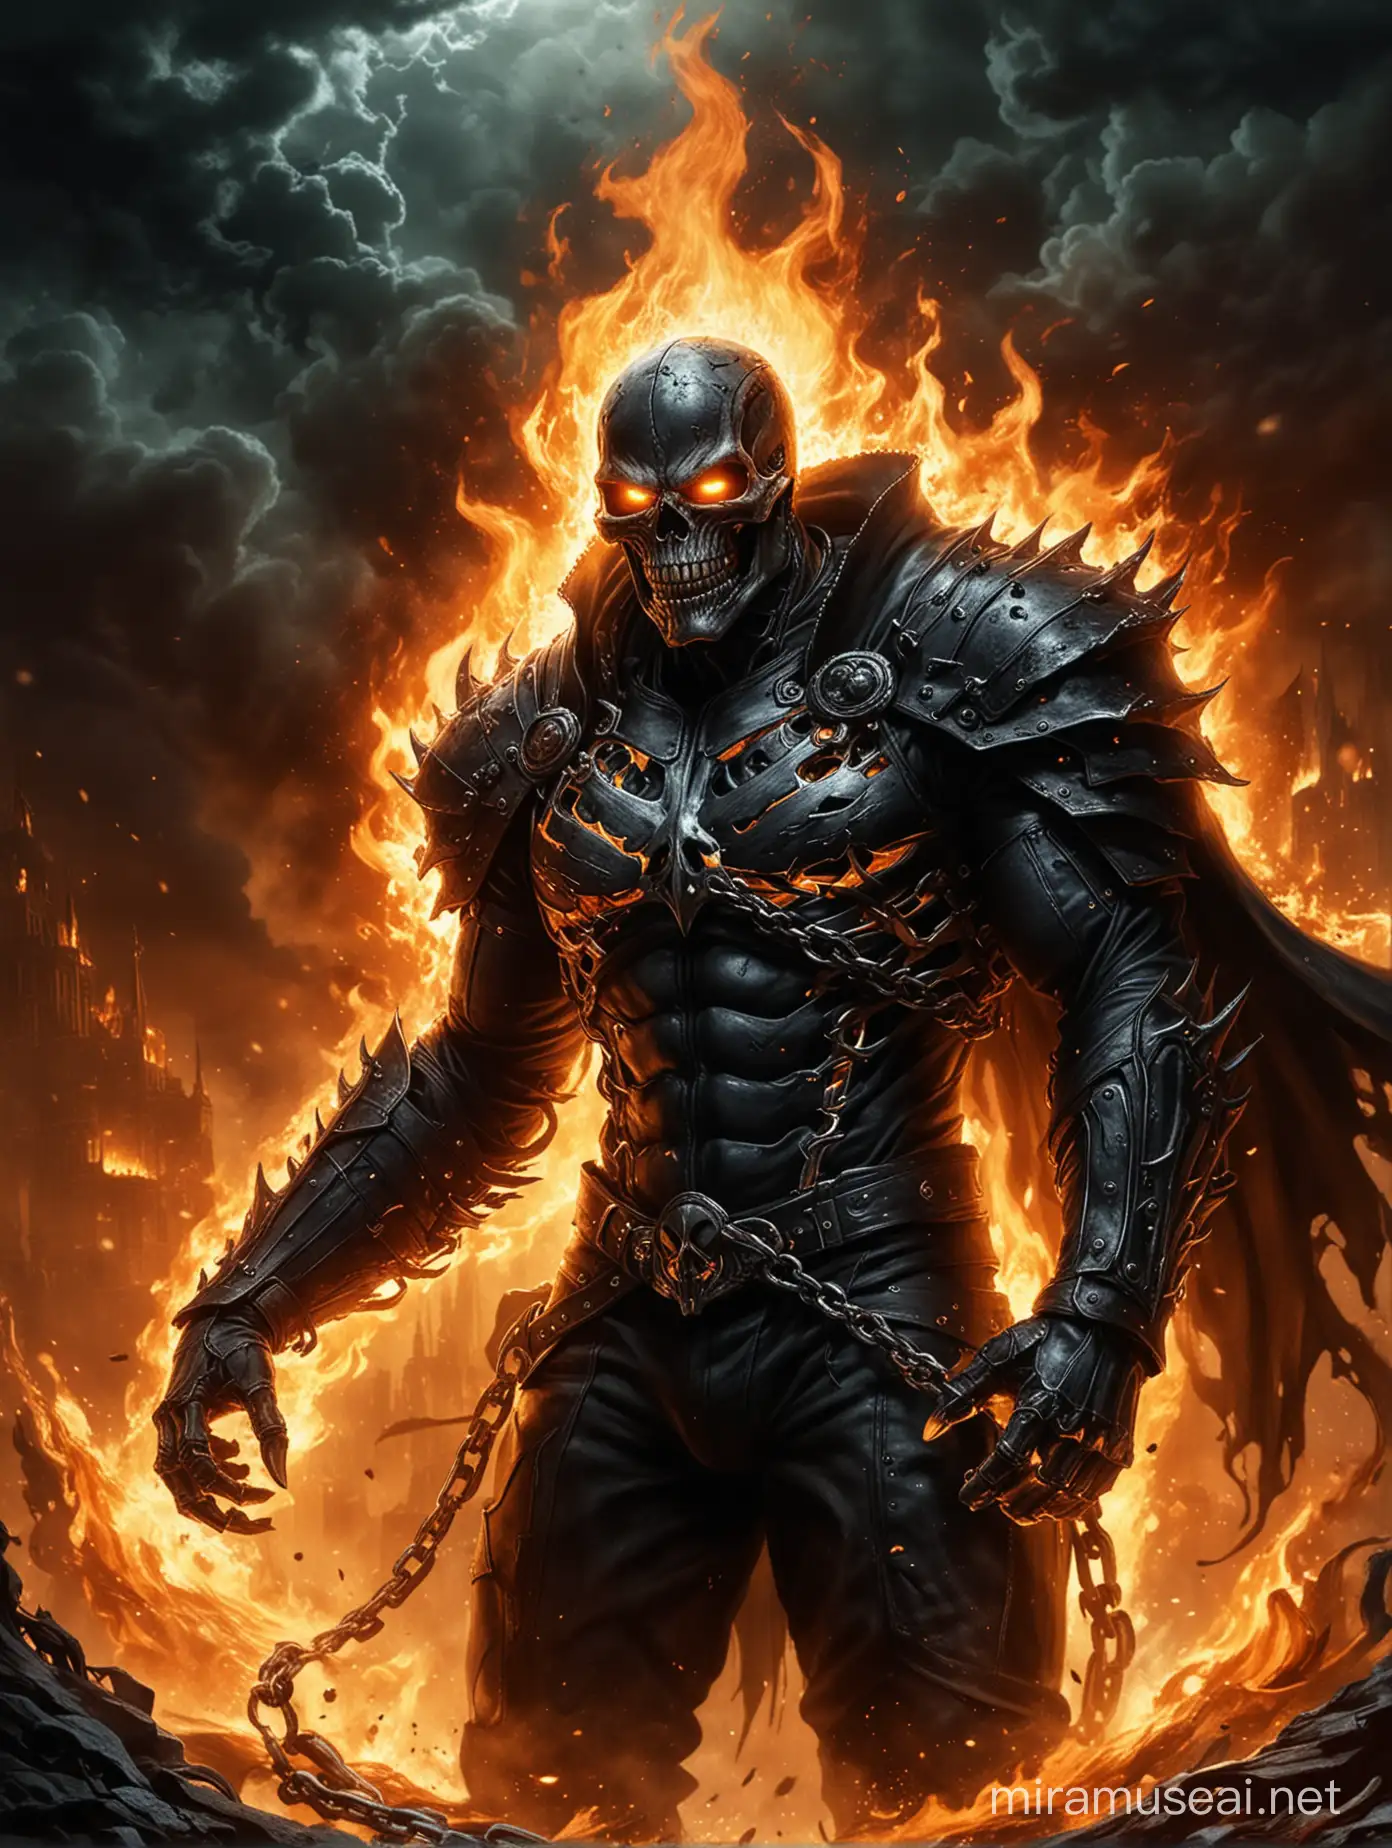 Ghost Rider Reigns Over Hells Chaos with Fiery Justice